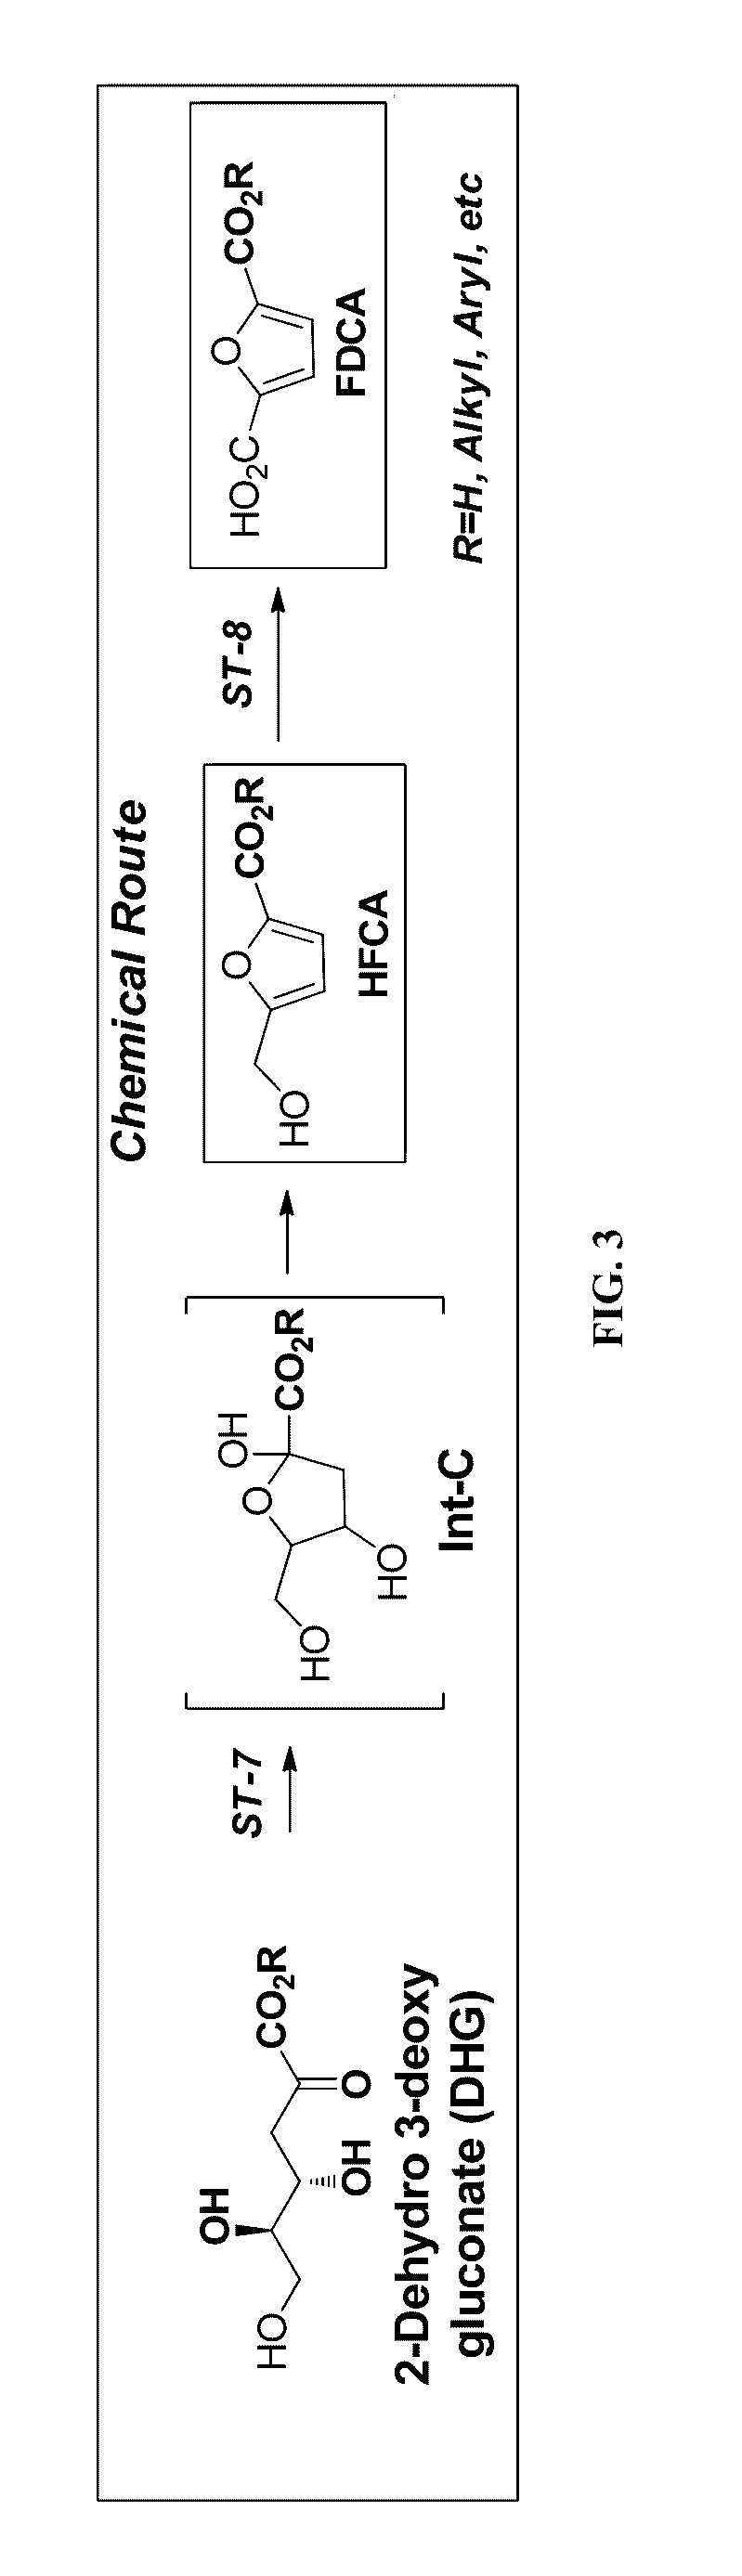 Synthesis of FDCA and FDCA precursors from gluconic acid derivatives